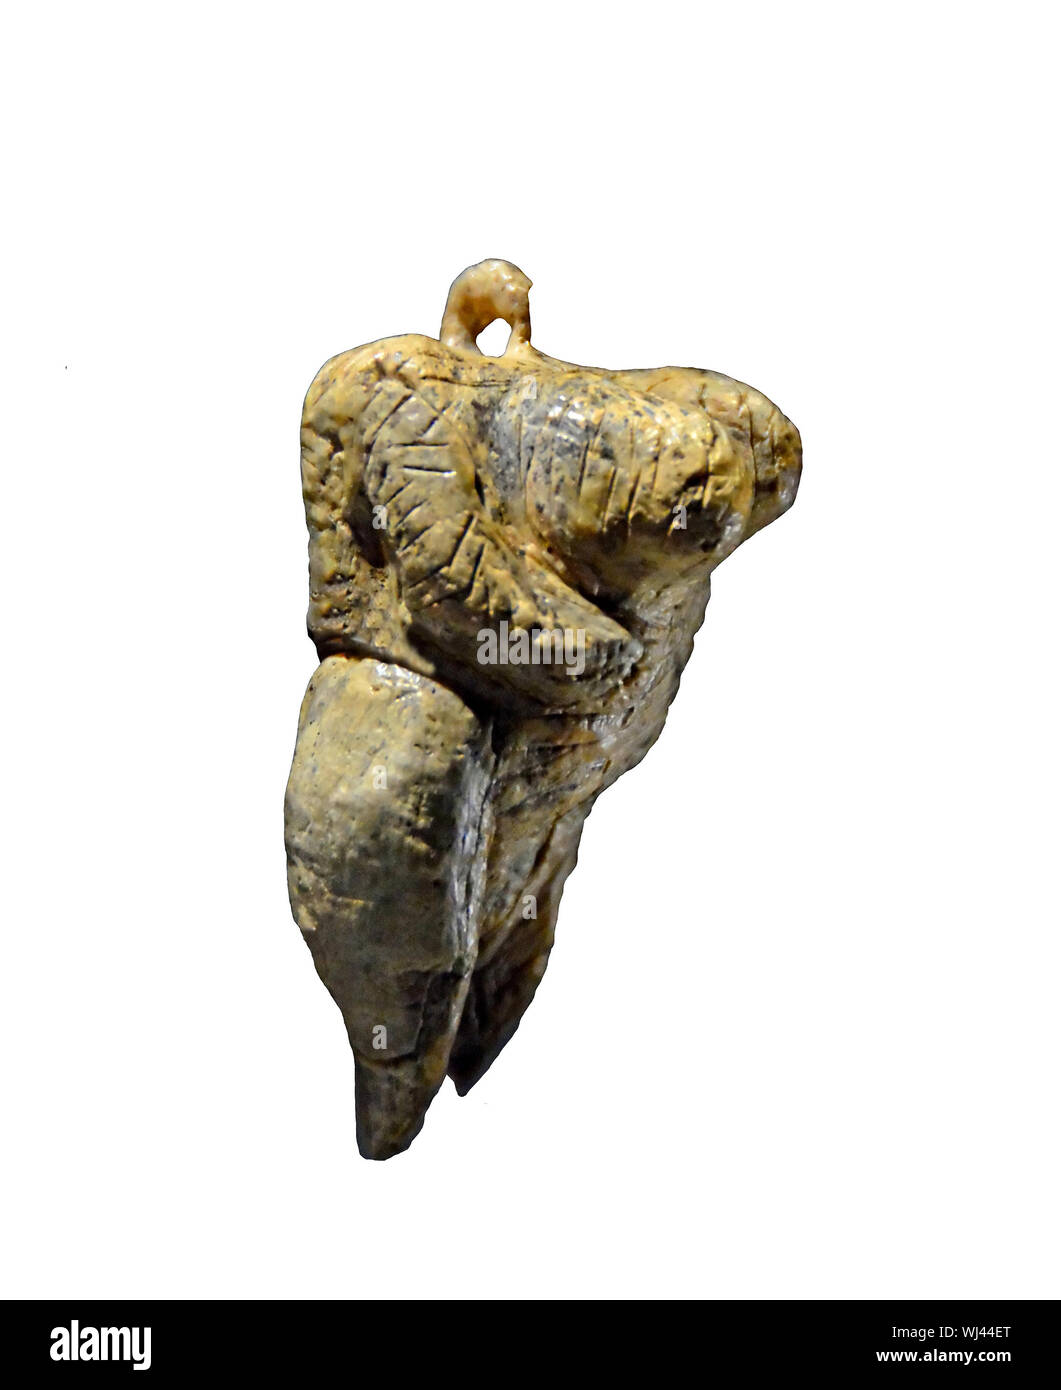 The Venus of Hohle Fels is the oldest undisputed image of a human dating from 40,000 years ago. She is fat and large breasted and carved from mammoth Stock Photo